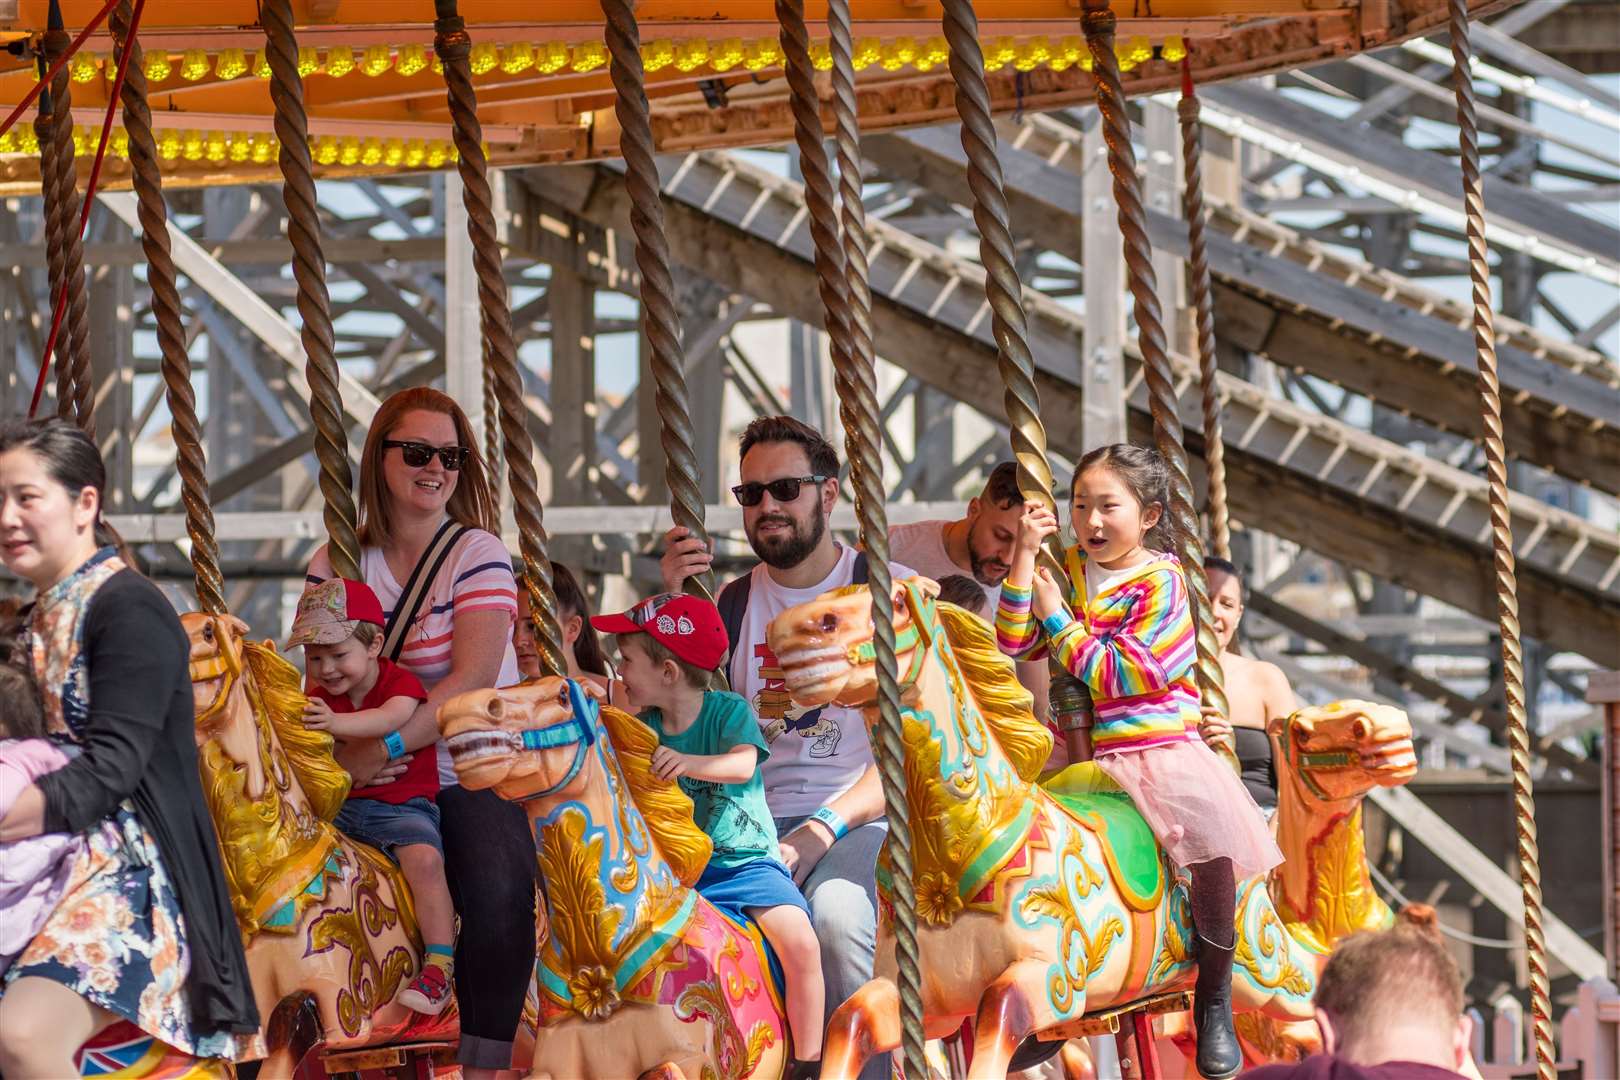 Dreamland is still a popular attraction in Kent. Picture credit: Dreamland